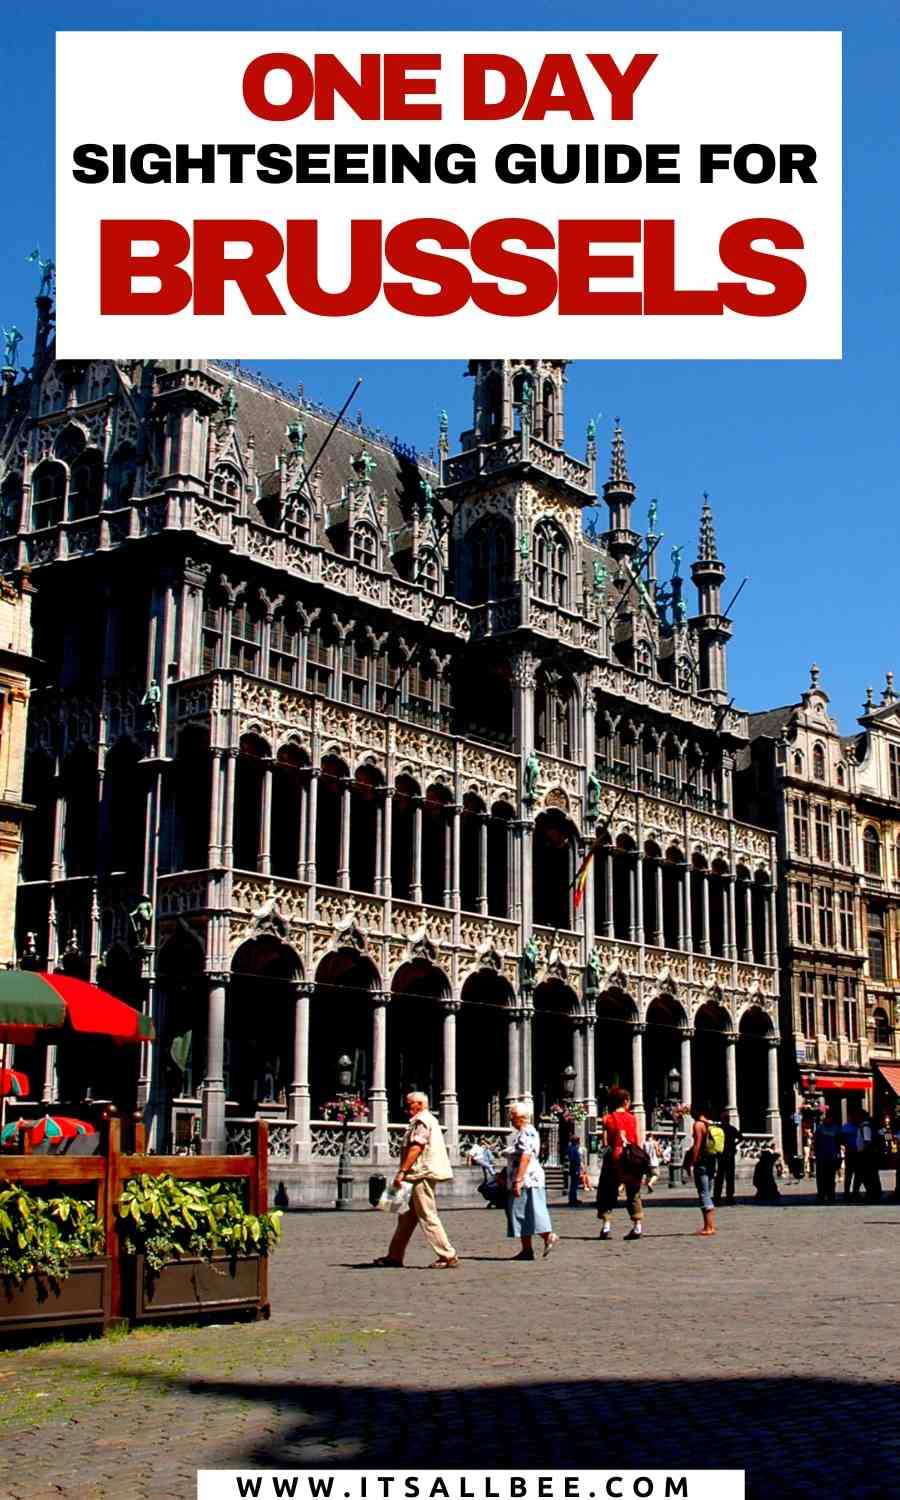 What to see in Brussels in one day | Brussels one day guide